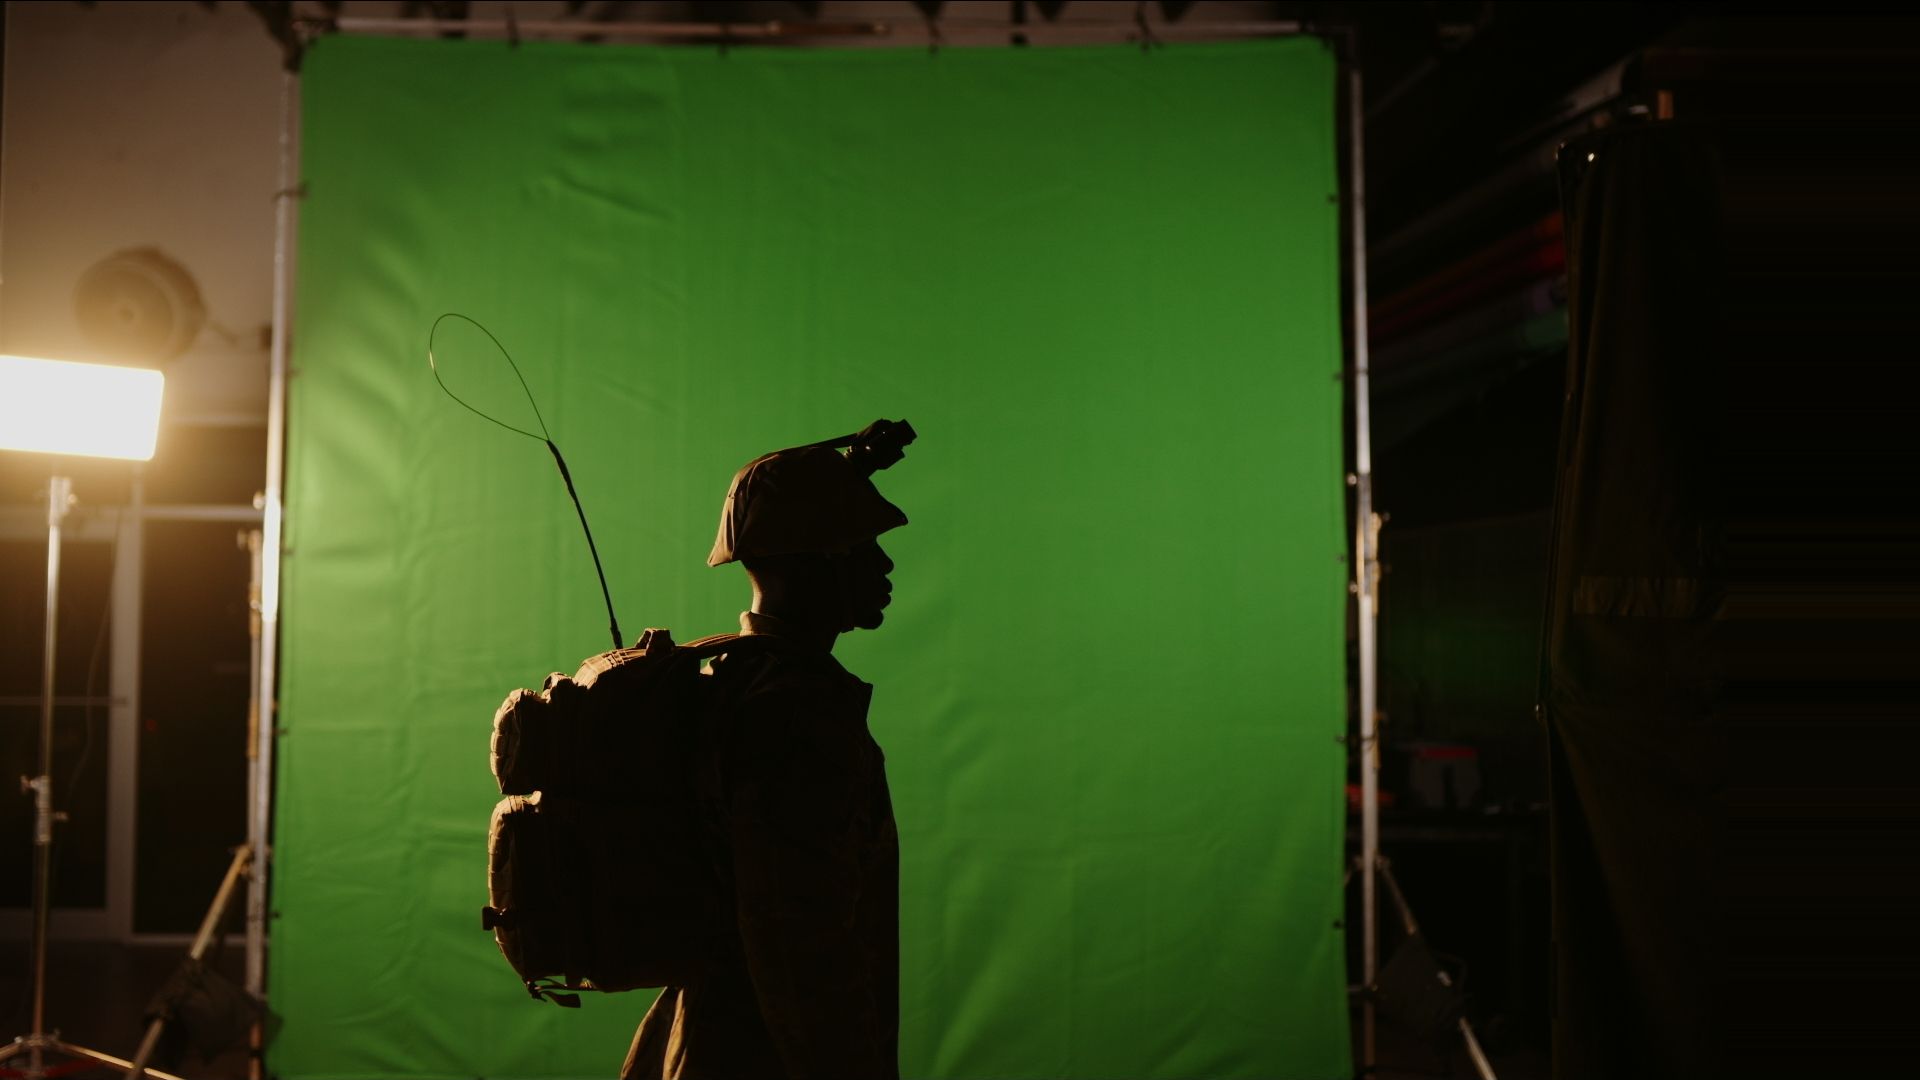 IU C&I Studios Page and Post The versatility of a green screen in film production and where to find a professional video company that has one Side profile silhouette of a solder wearing gear in front of a green backdrop in a studio